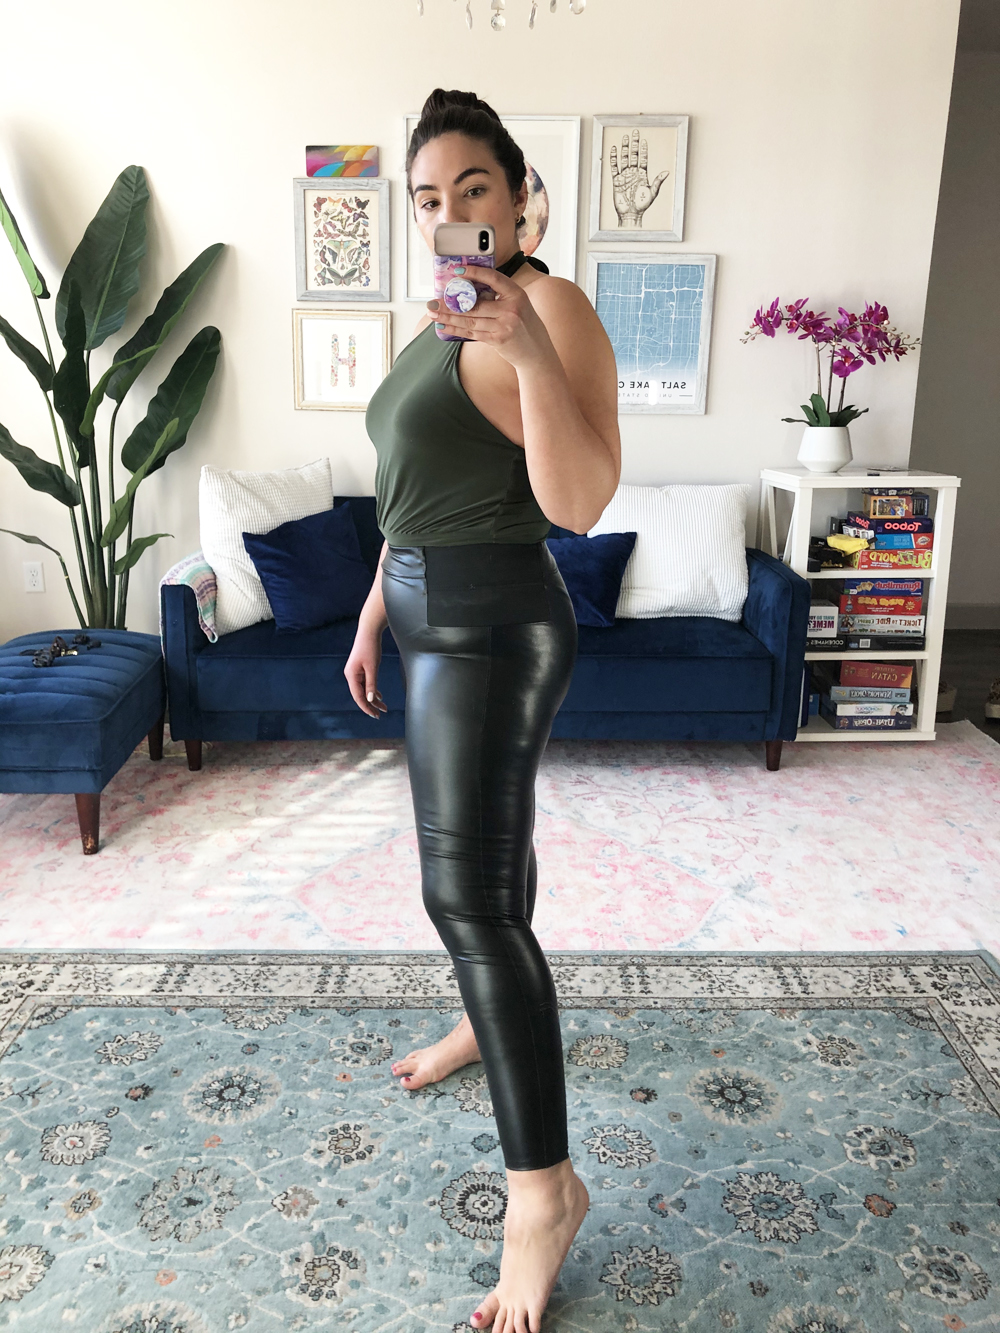 lauryncakes (fashion and style blogger) compares different Spanx leggings dupes and knock offs